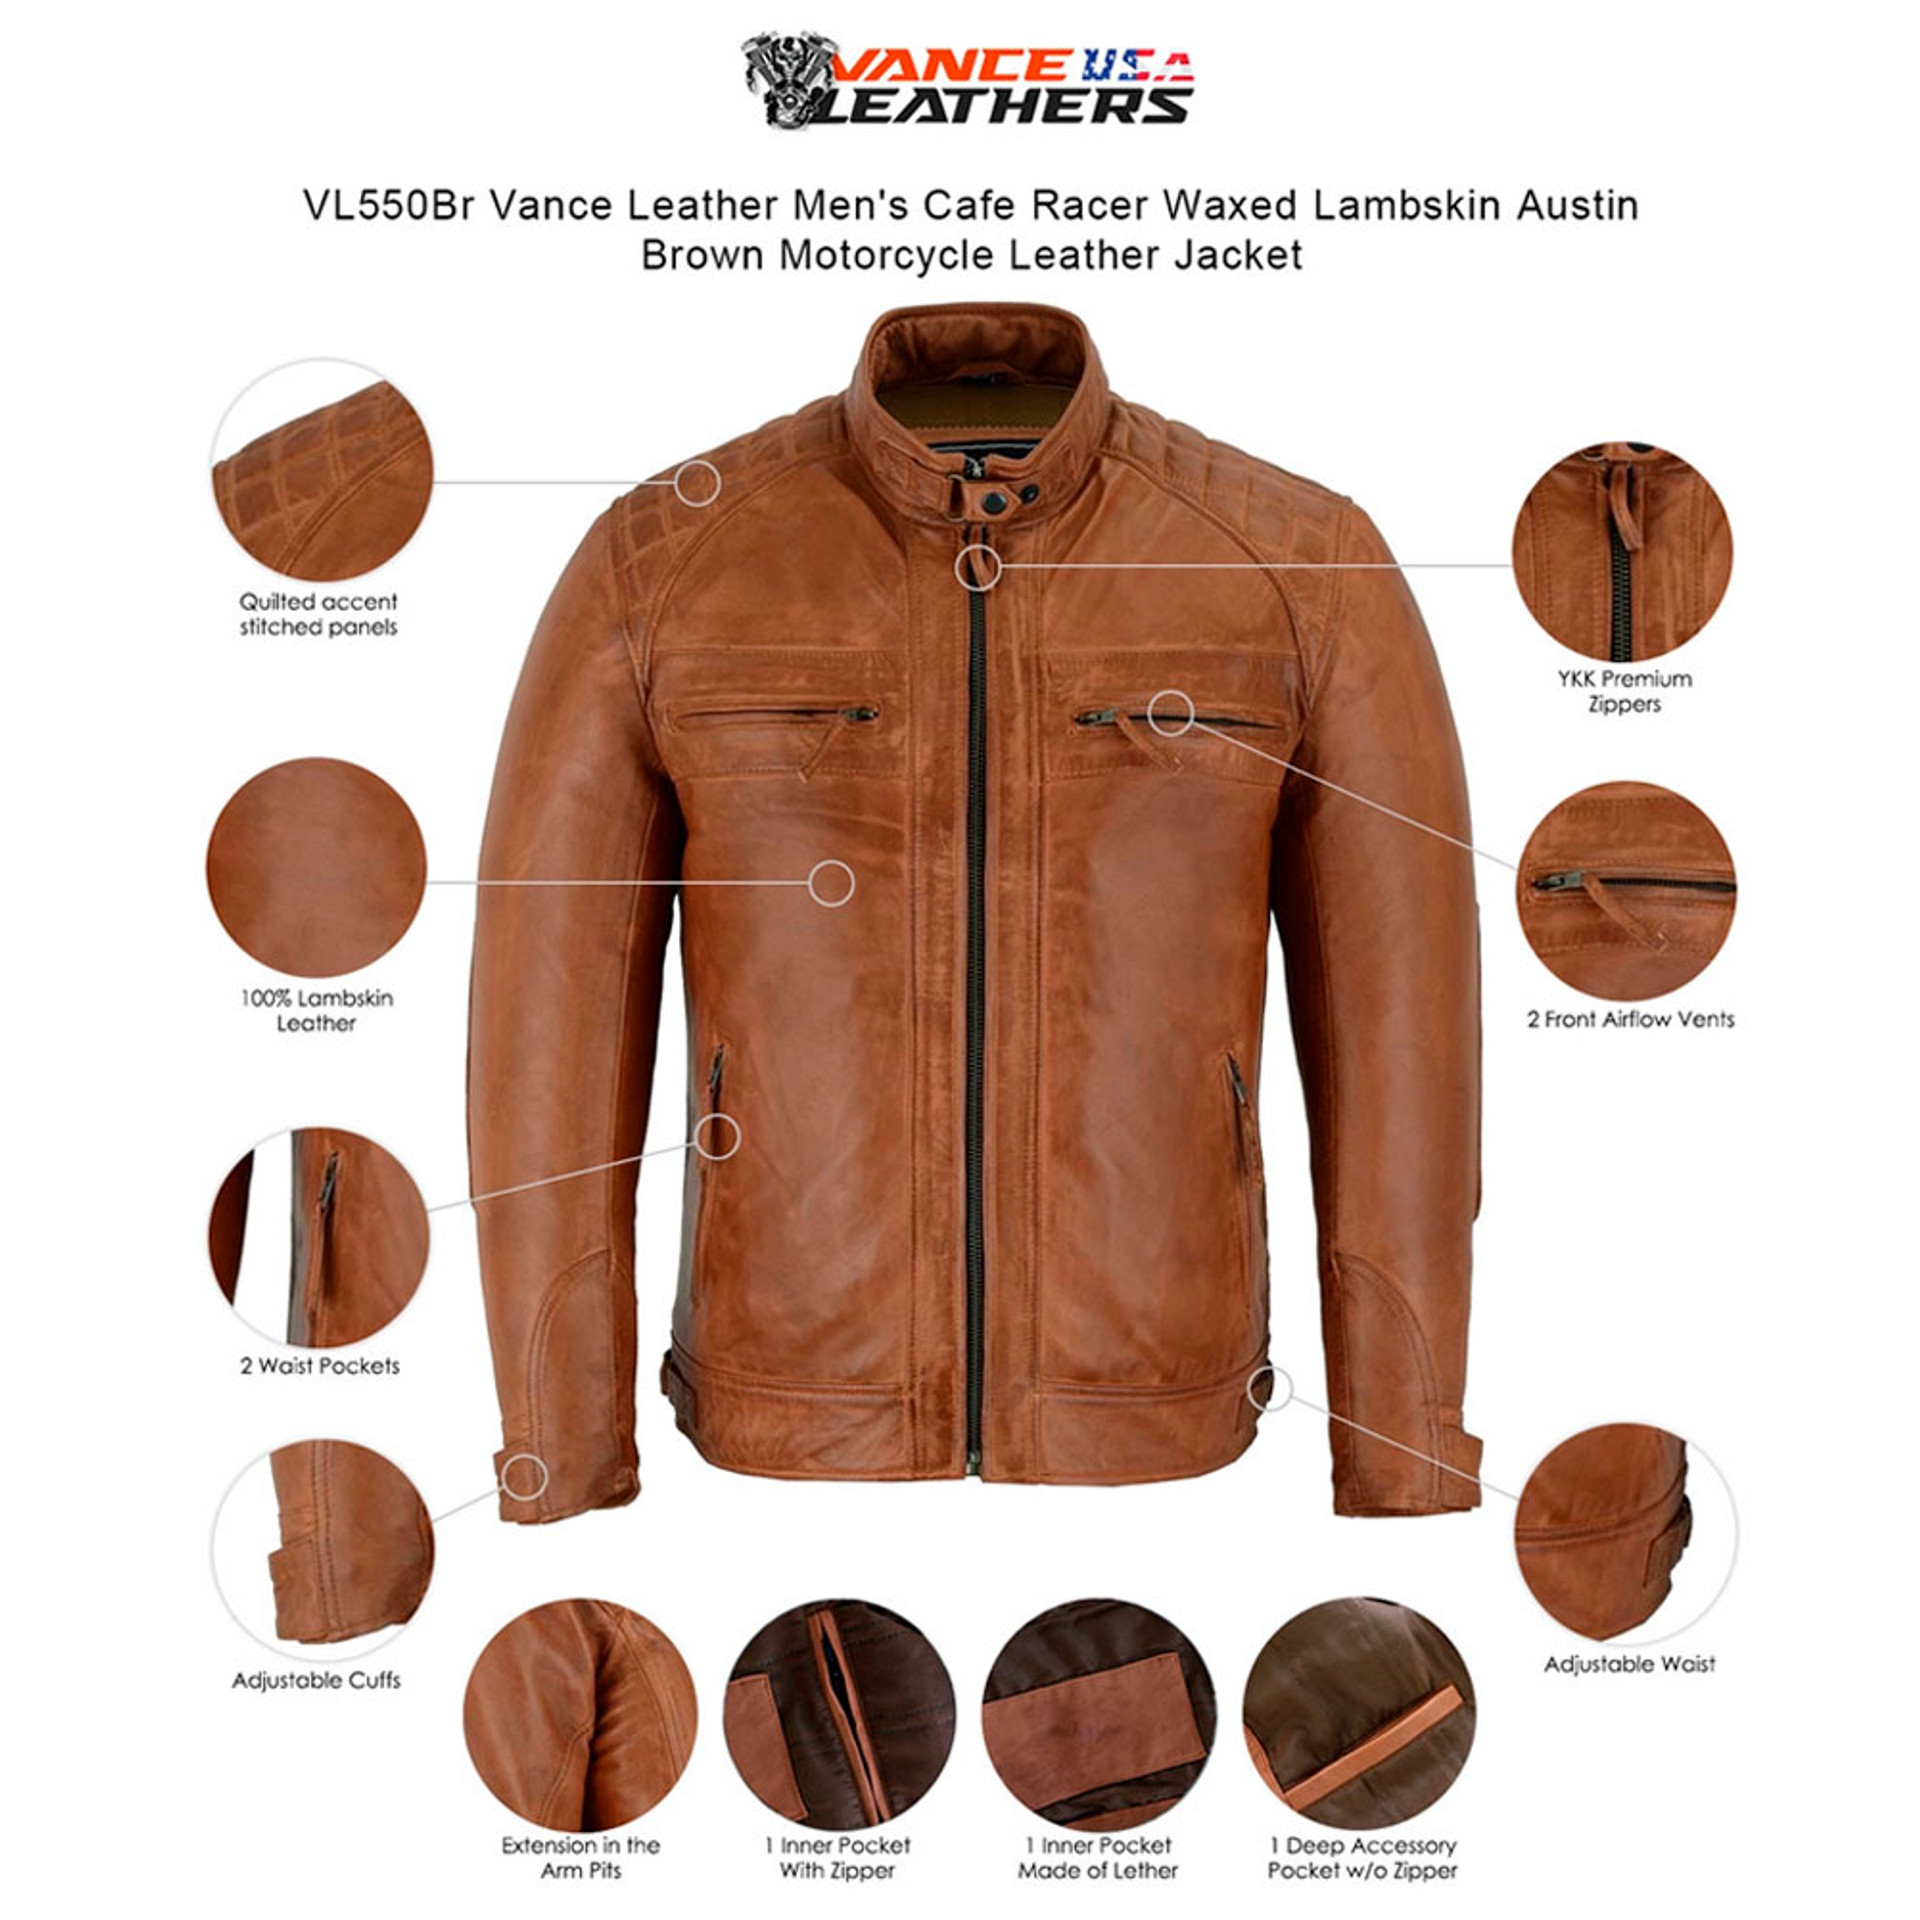 VANCE LEATHERS USA Men's Cafe Racer Waxed Lambskin Motorcycle Leather ...